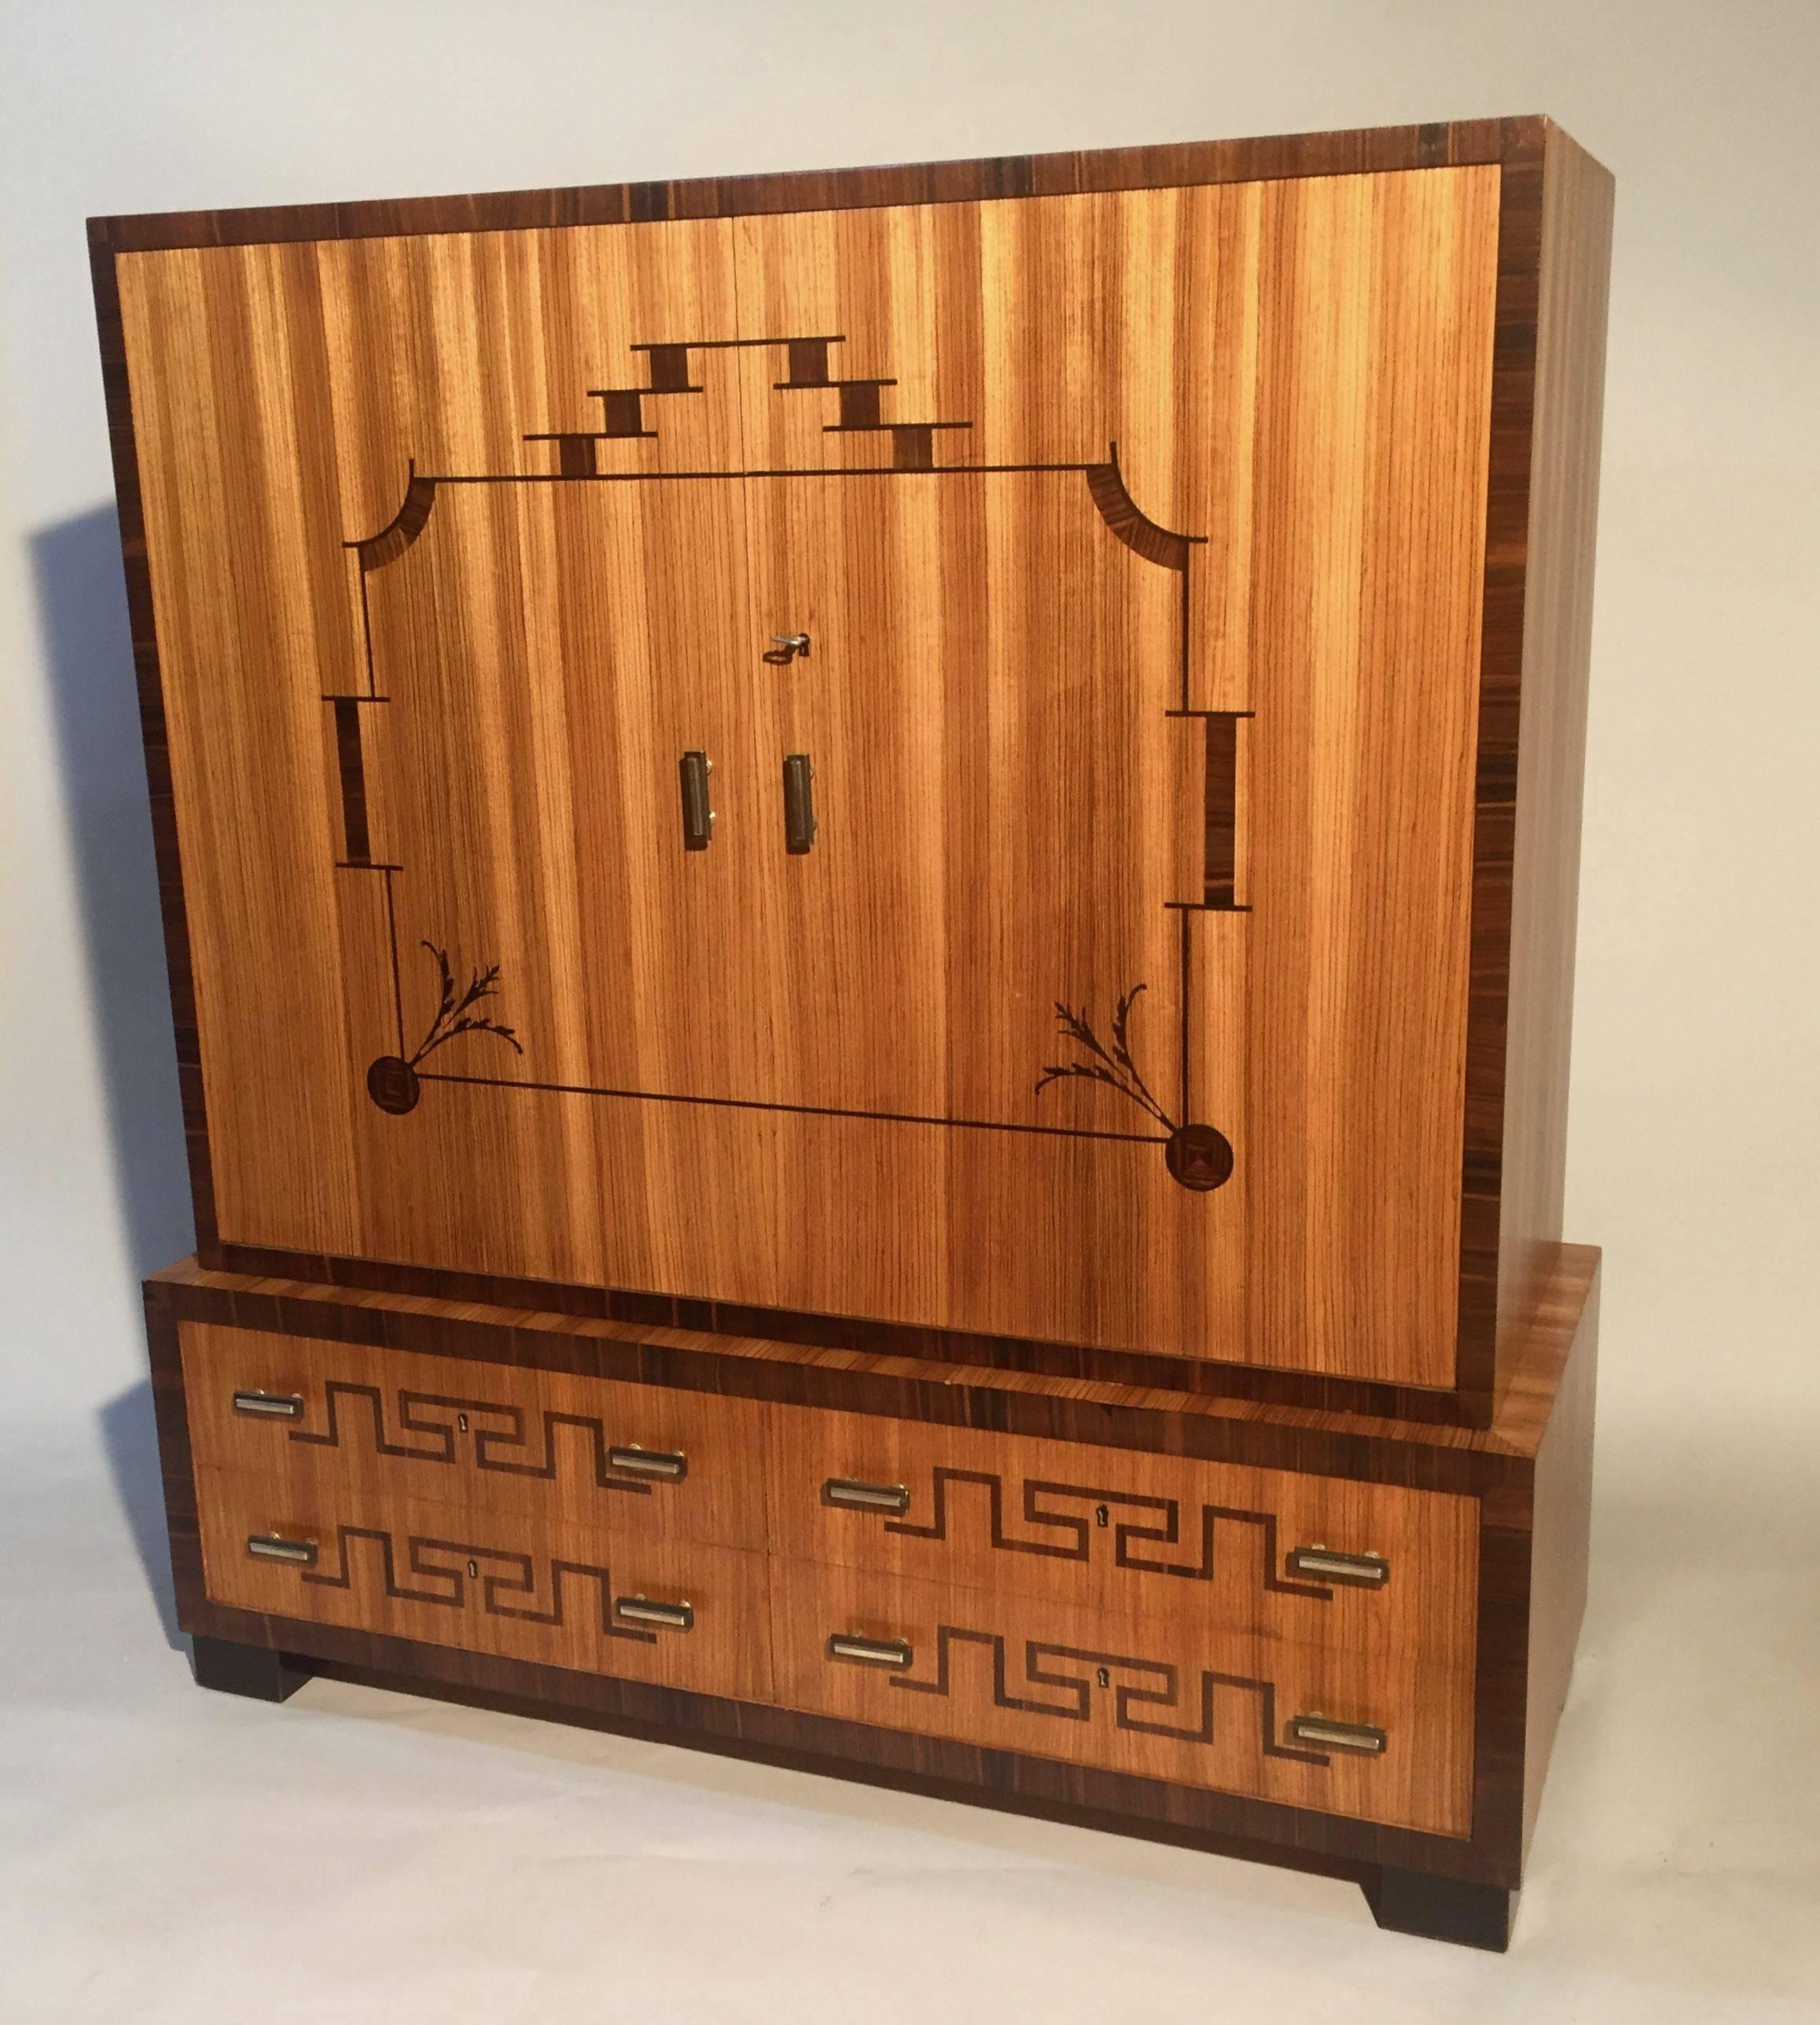 An exceptional Art Deco cabinet from the marvellous 